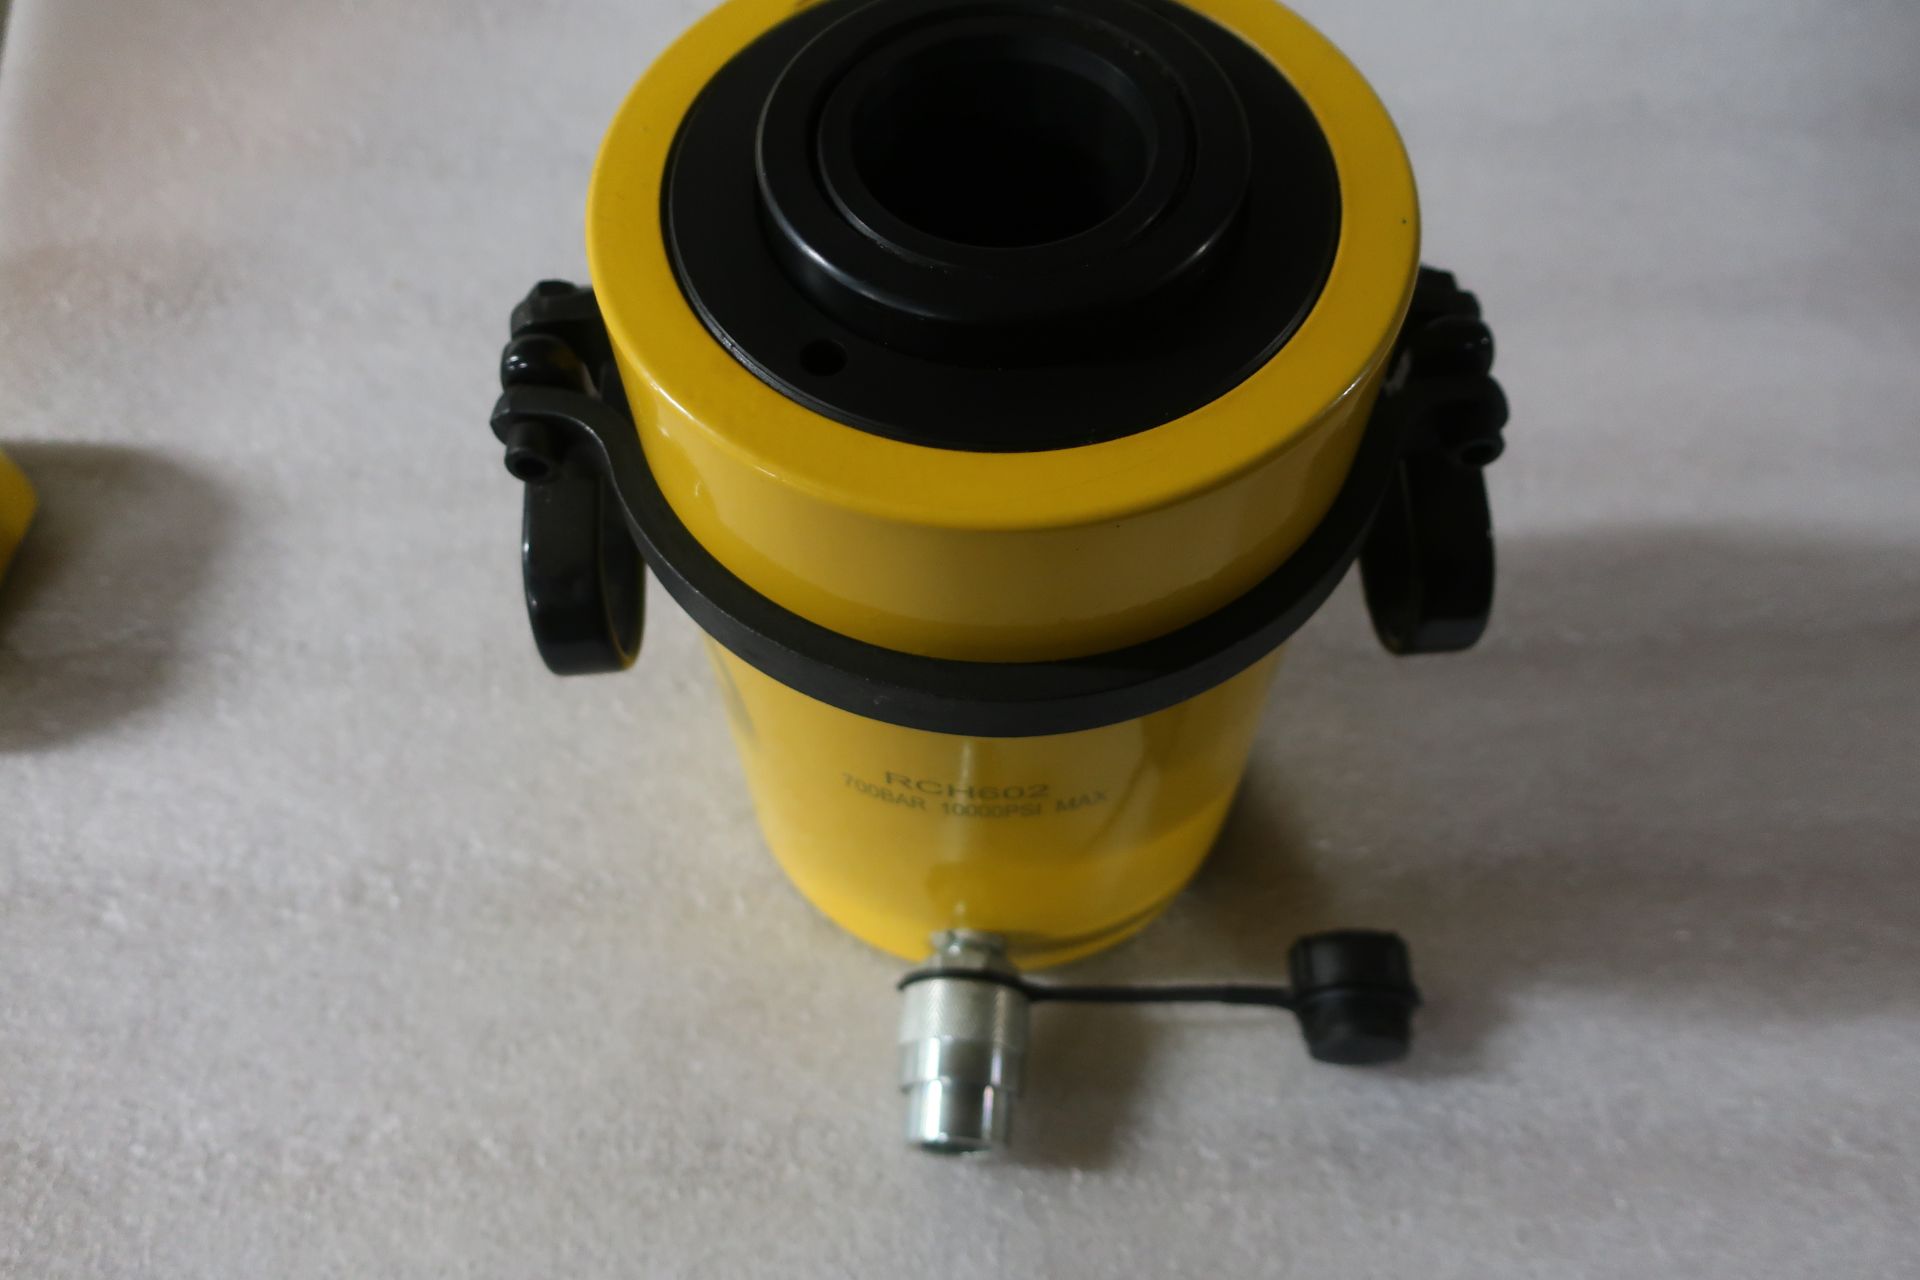 RCH-602 MINT Hole Jack - 60 ton Hollow Hydraulic Jack with 2" stroke - hole through type cylinder - Image 2 of 2